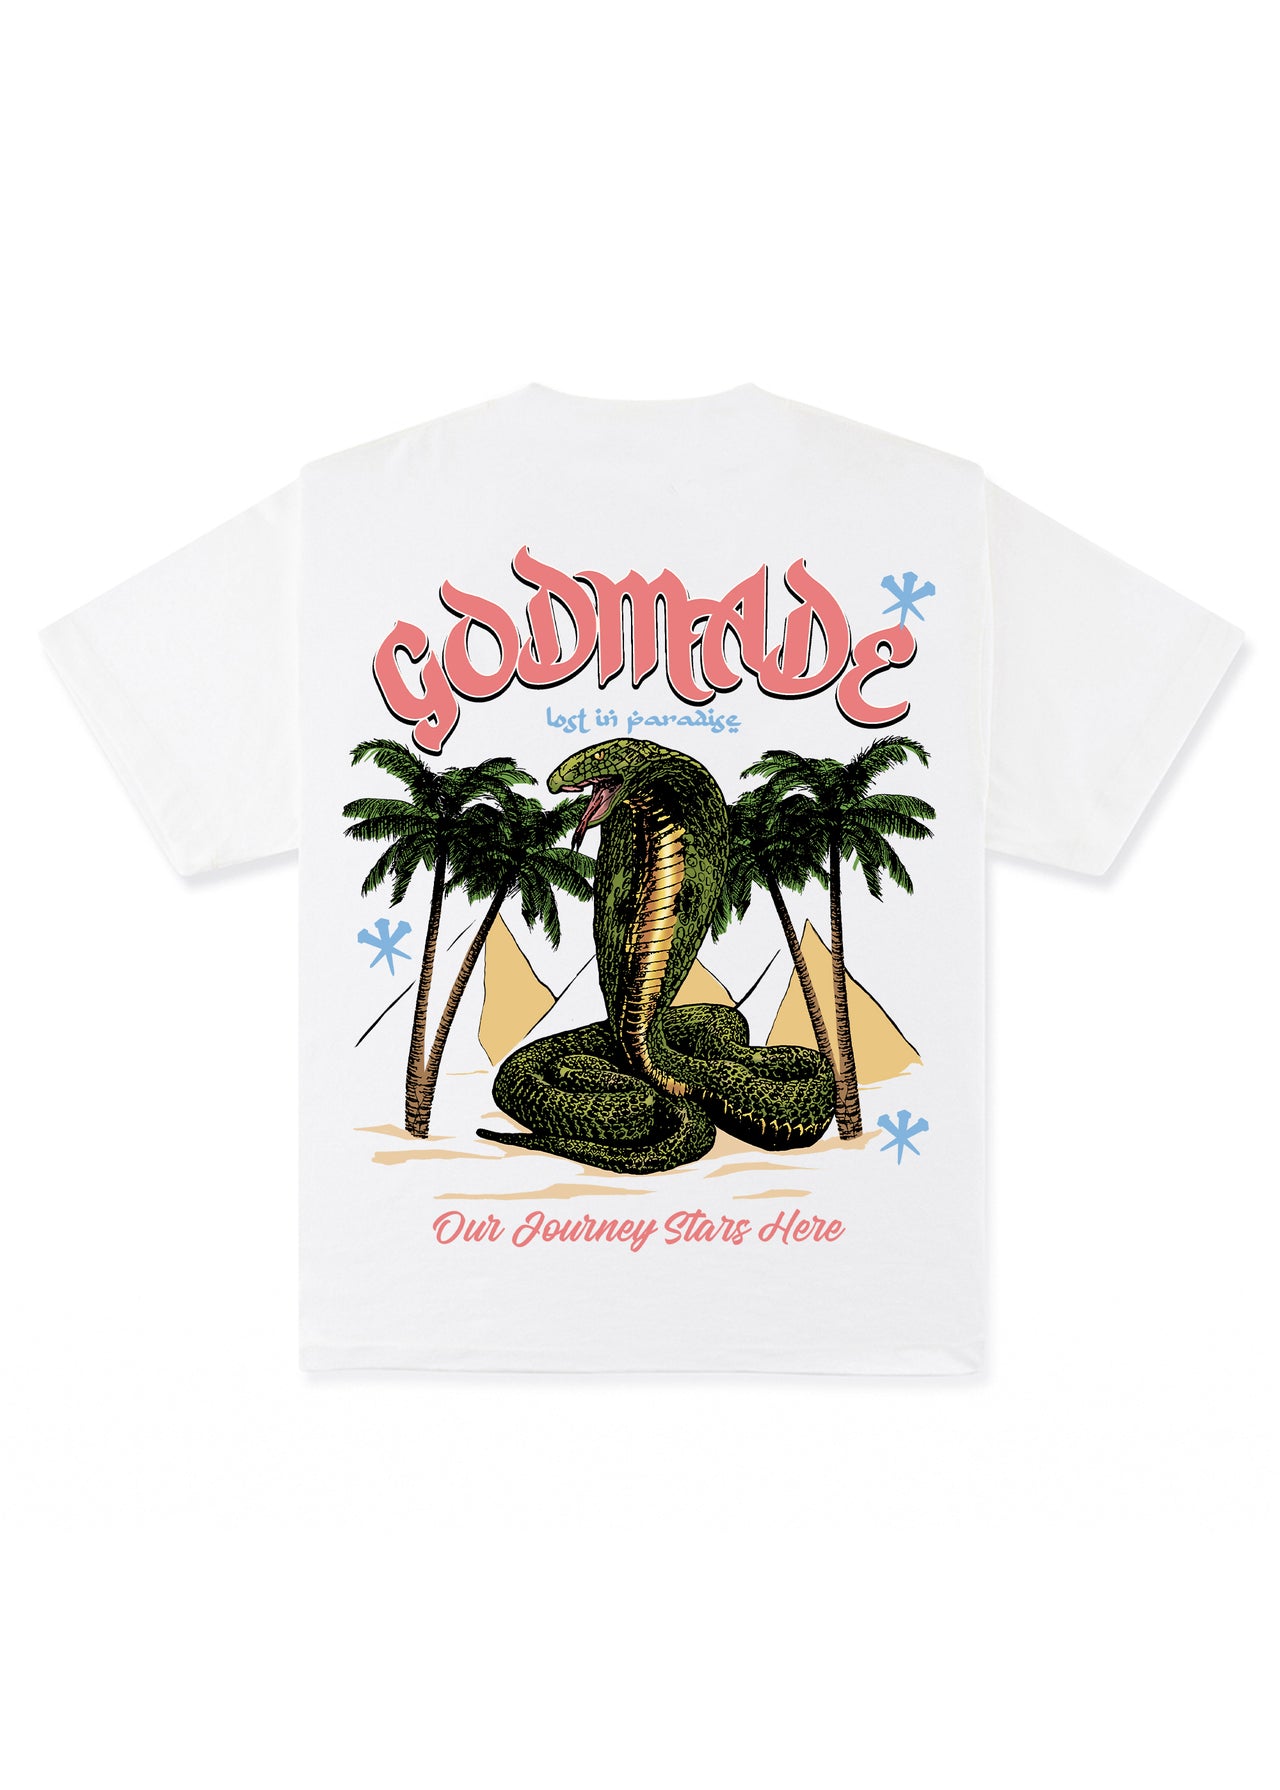 LOST IN PARADISE - WHITE T-SHIRT